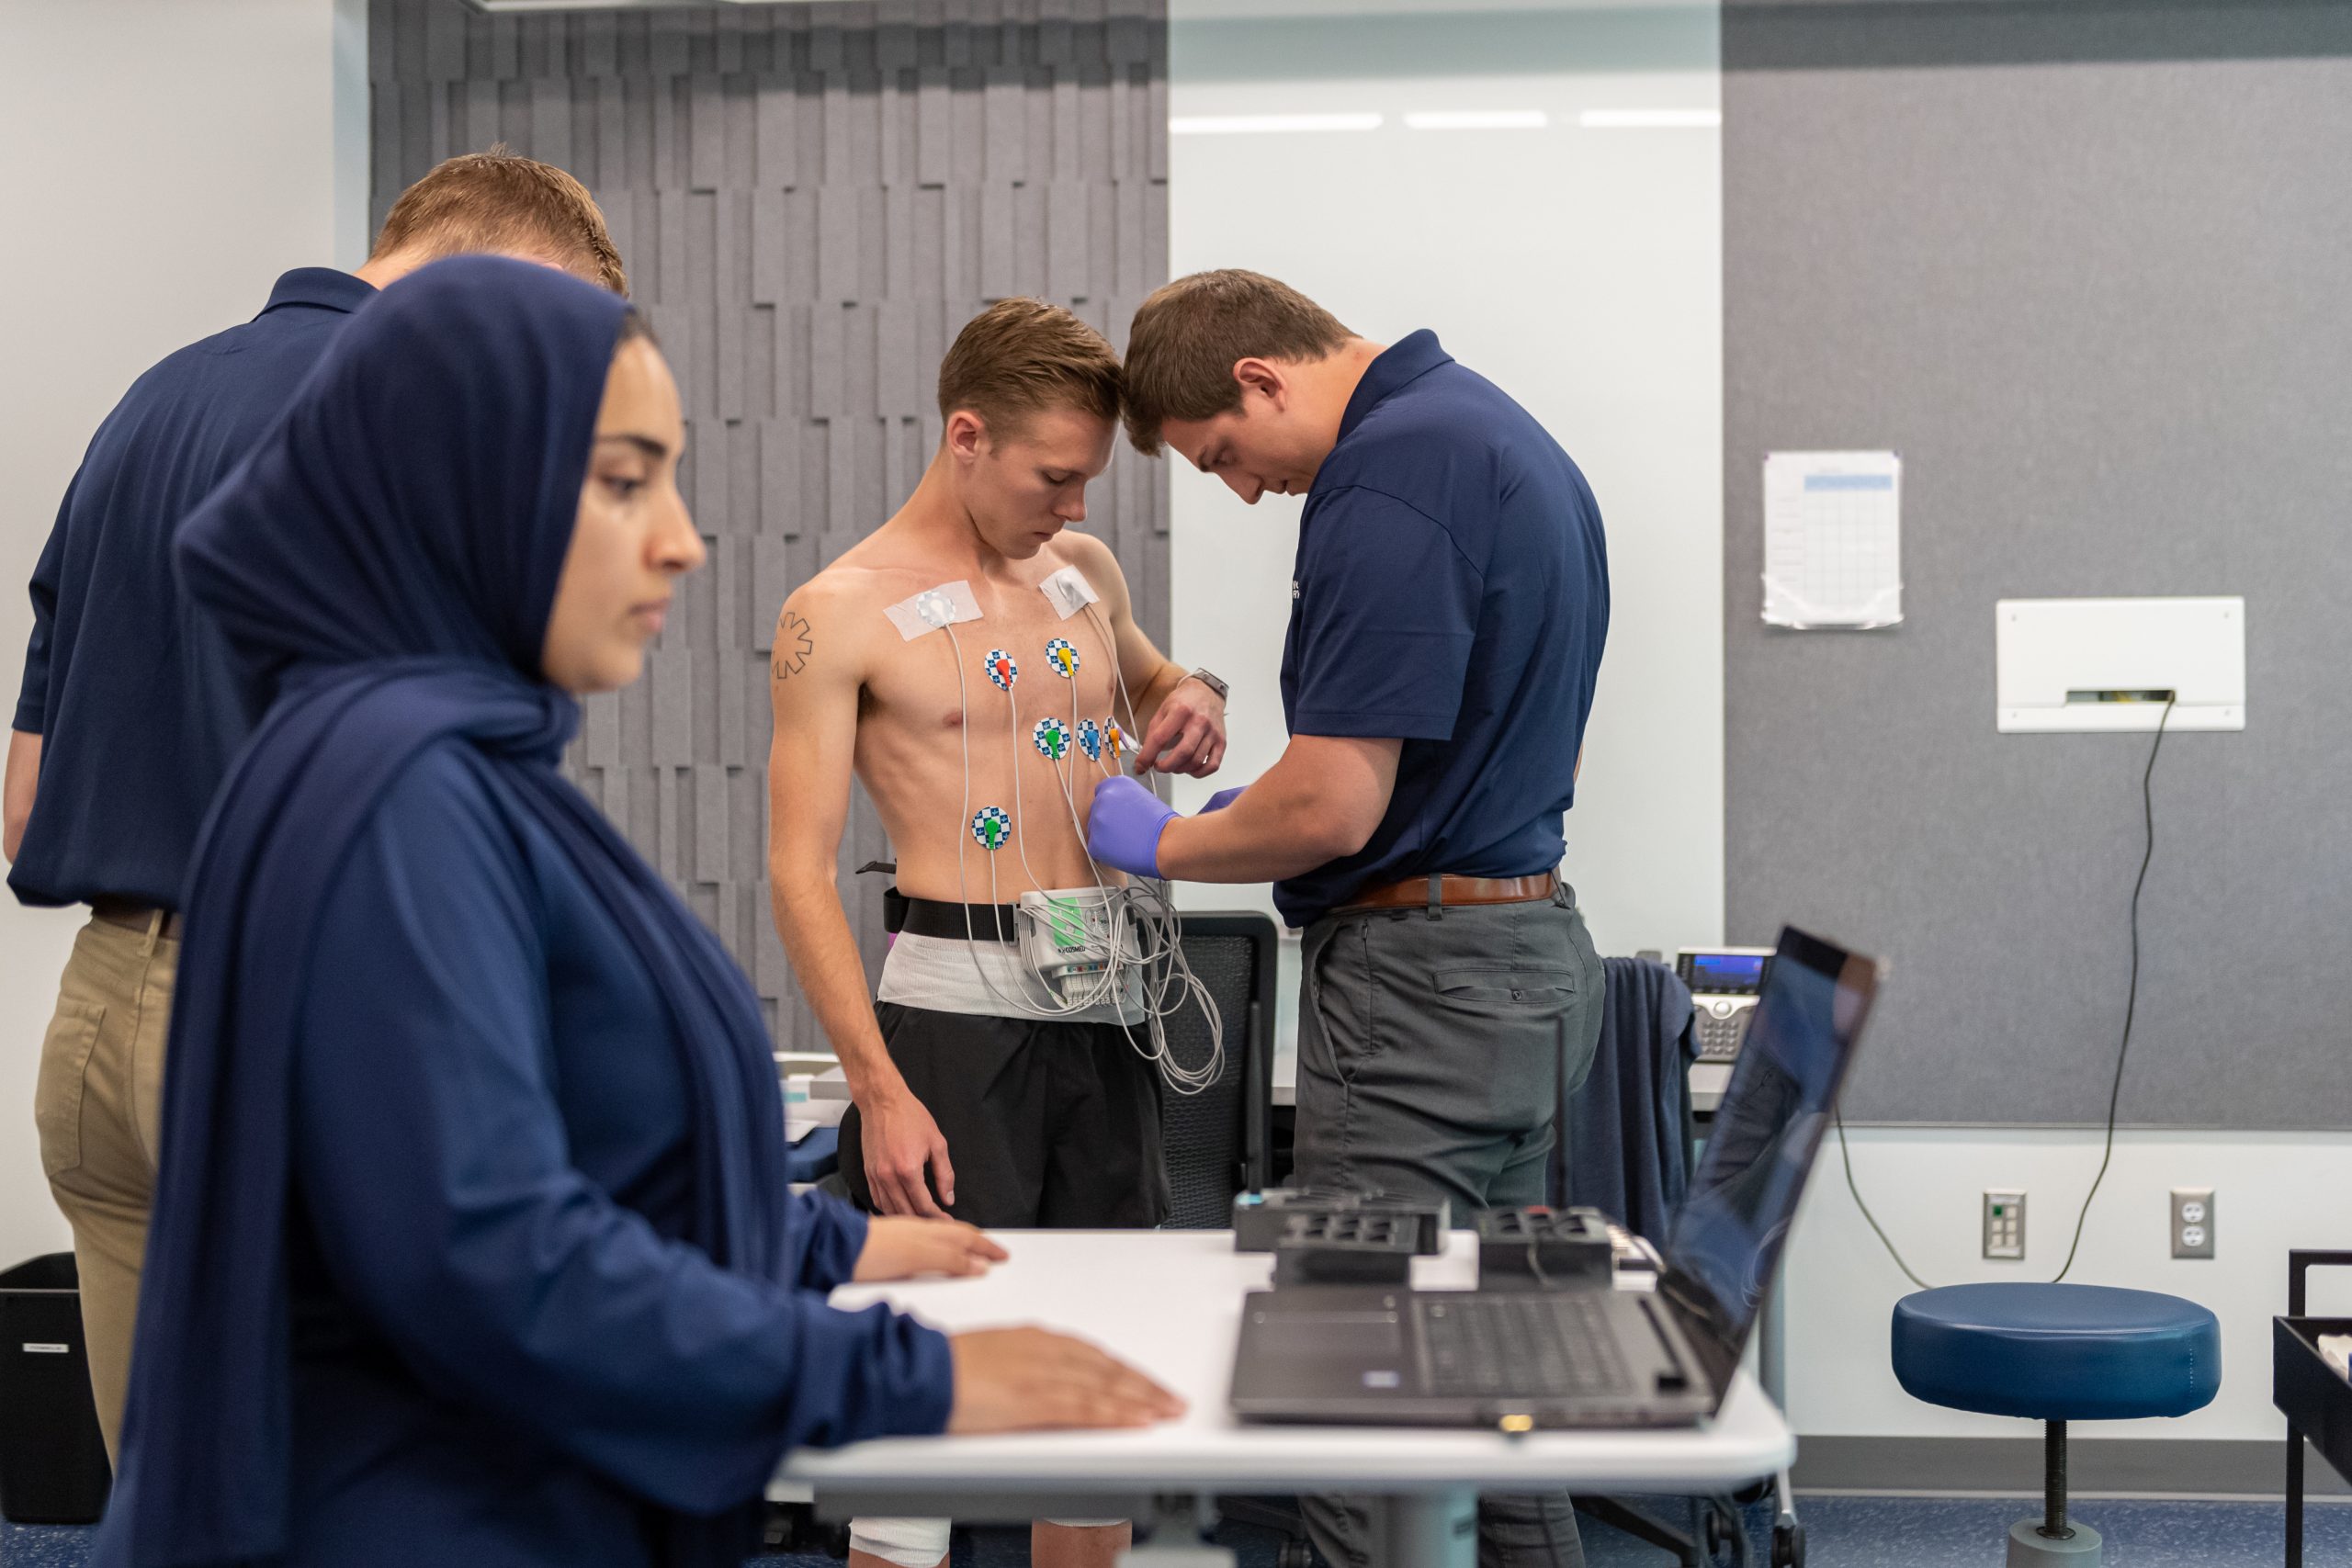 Students connecting vital tracking devices to an athlete for the Kineseology treadmill study.